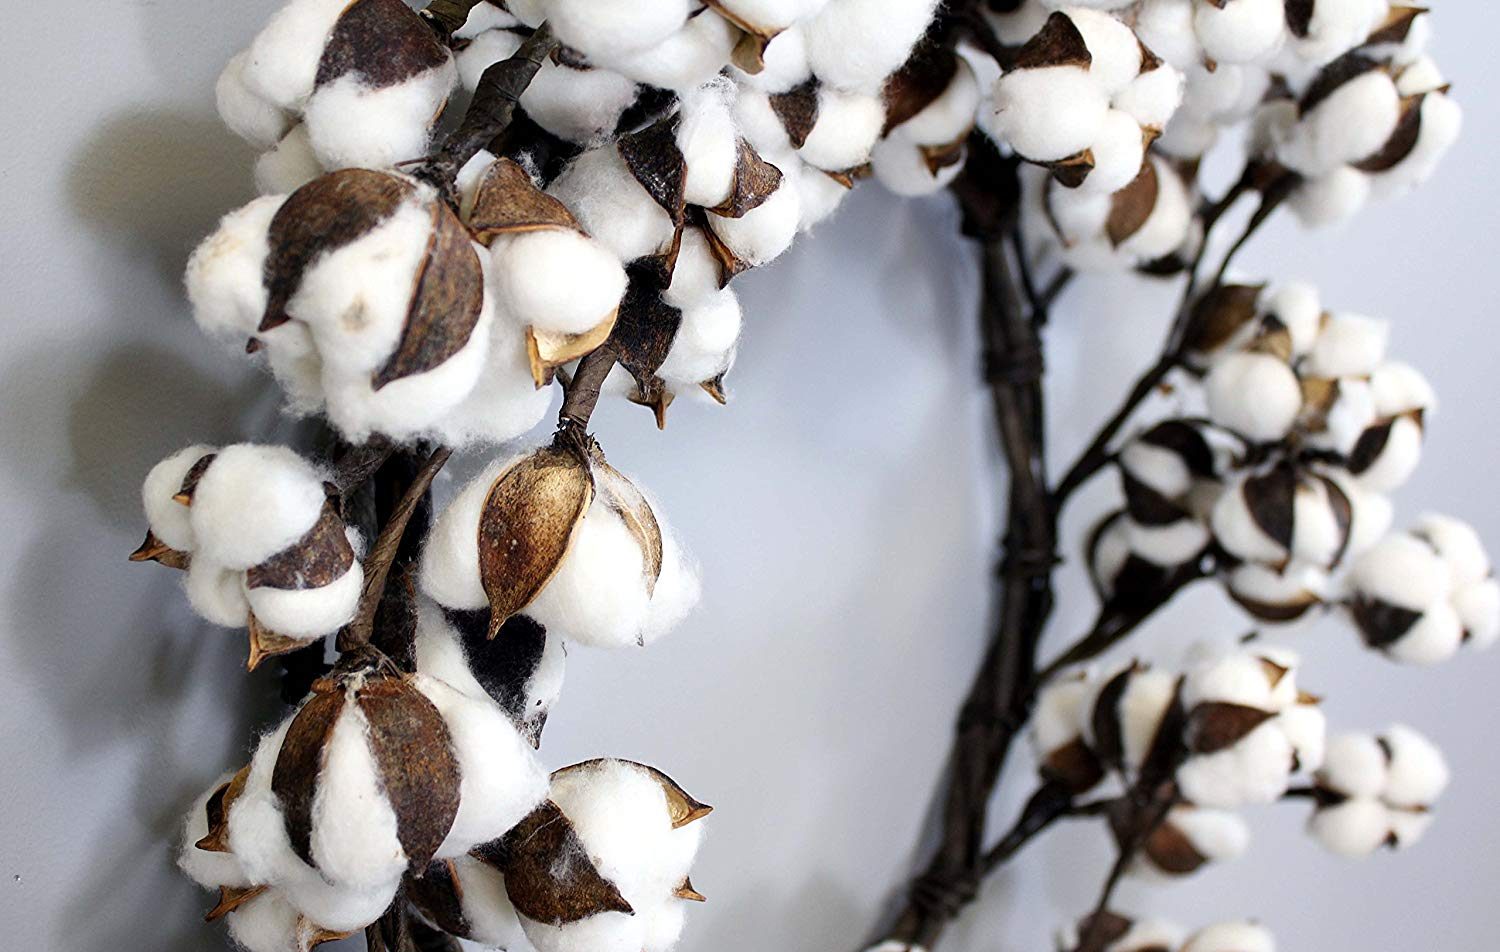 Cotton wreaths from Magnolia Market or the Amazon wreath for under $40?